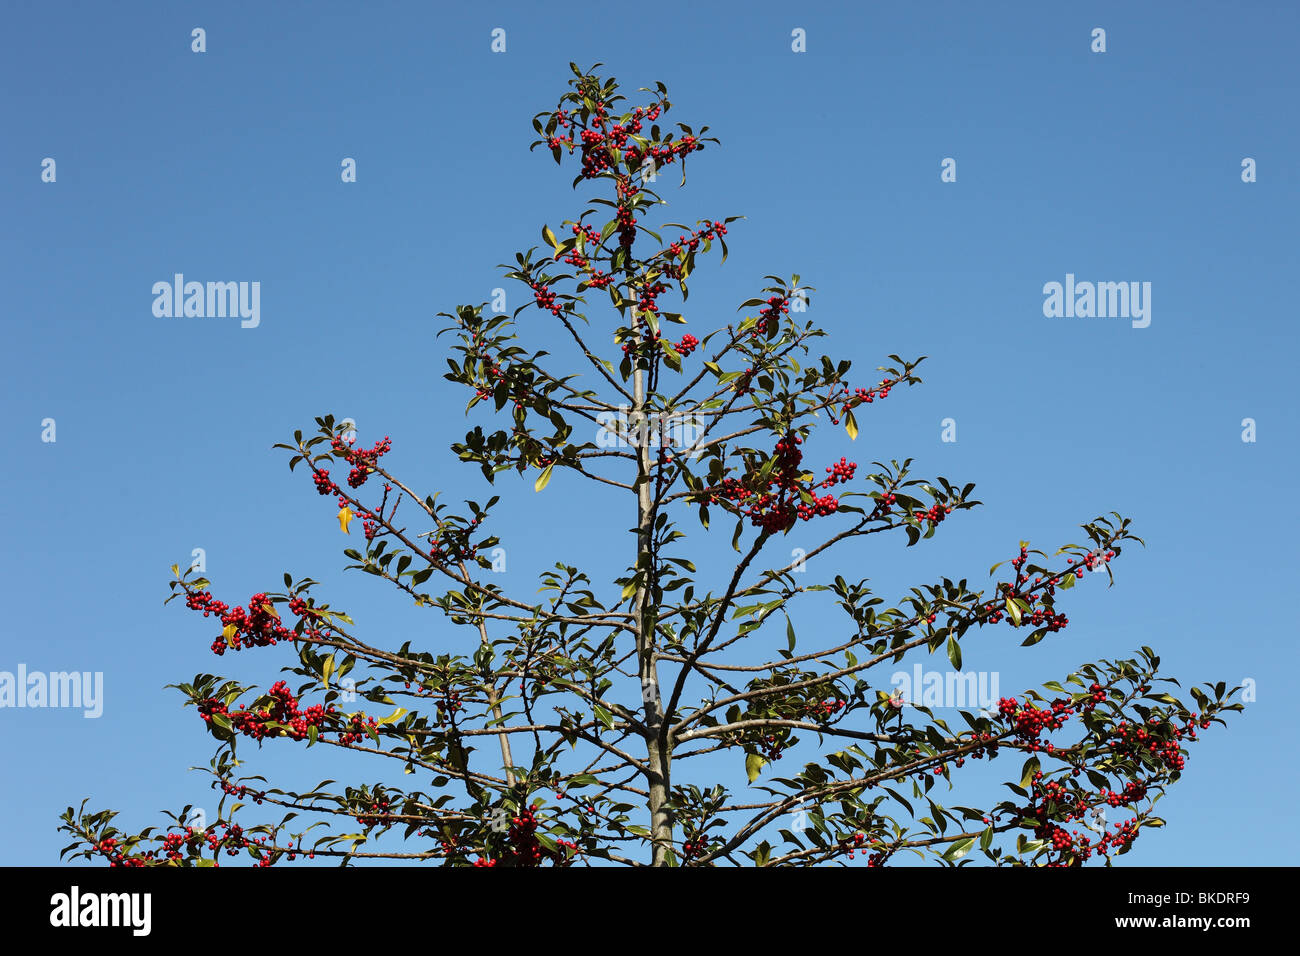 Holly tree in berry Stock Photo